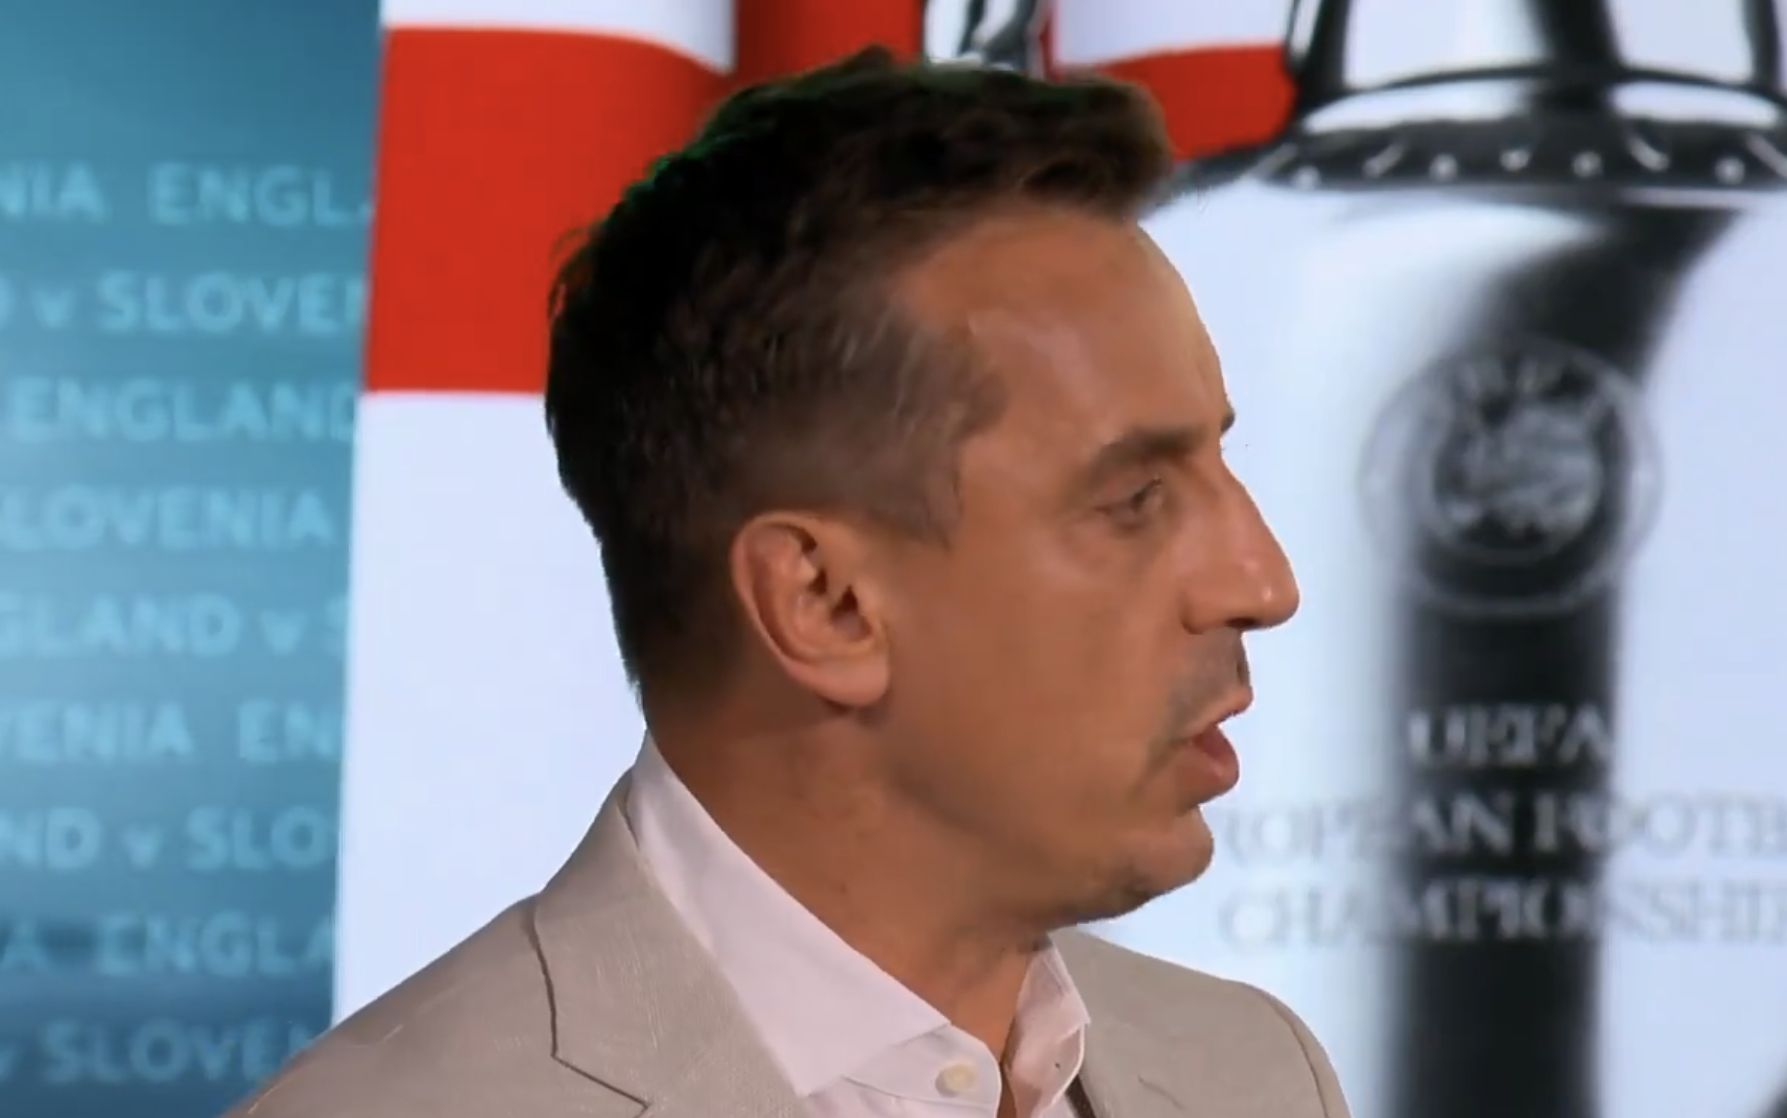 Video: Gary Neville labels England “basic” and calls their situation “sad”